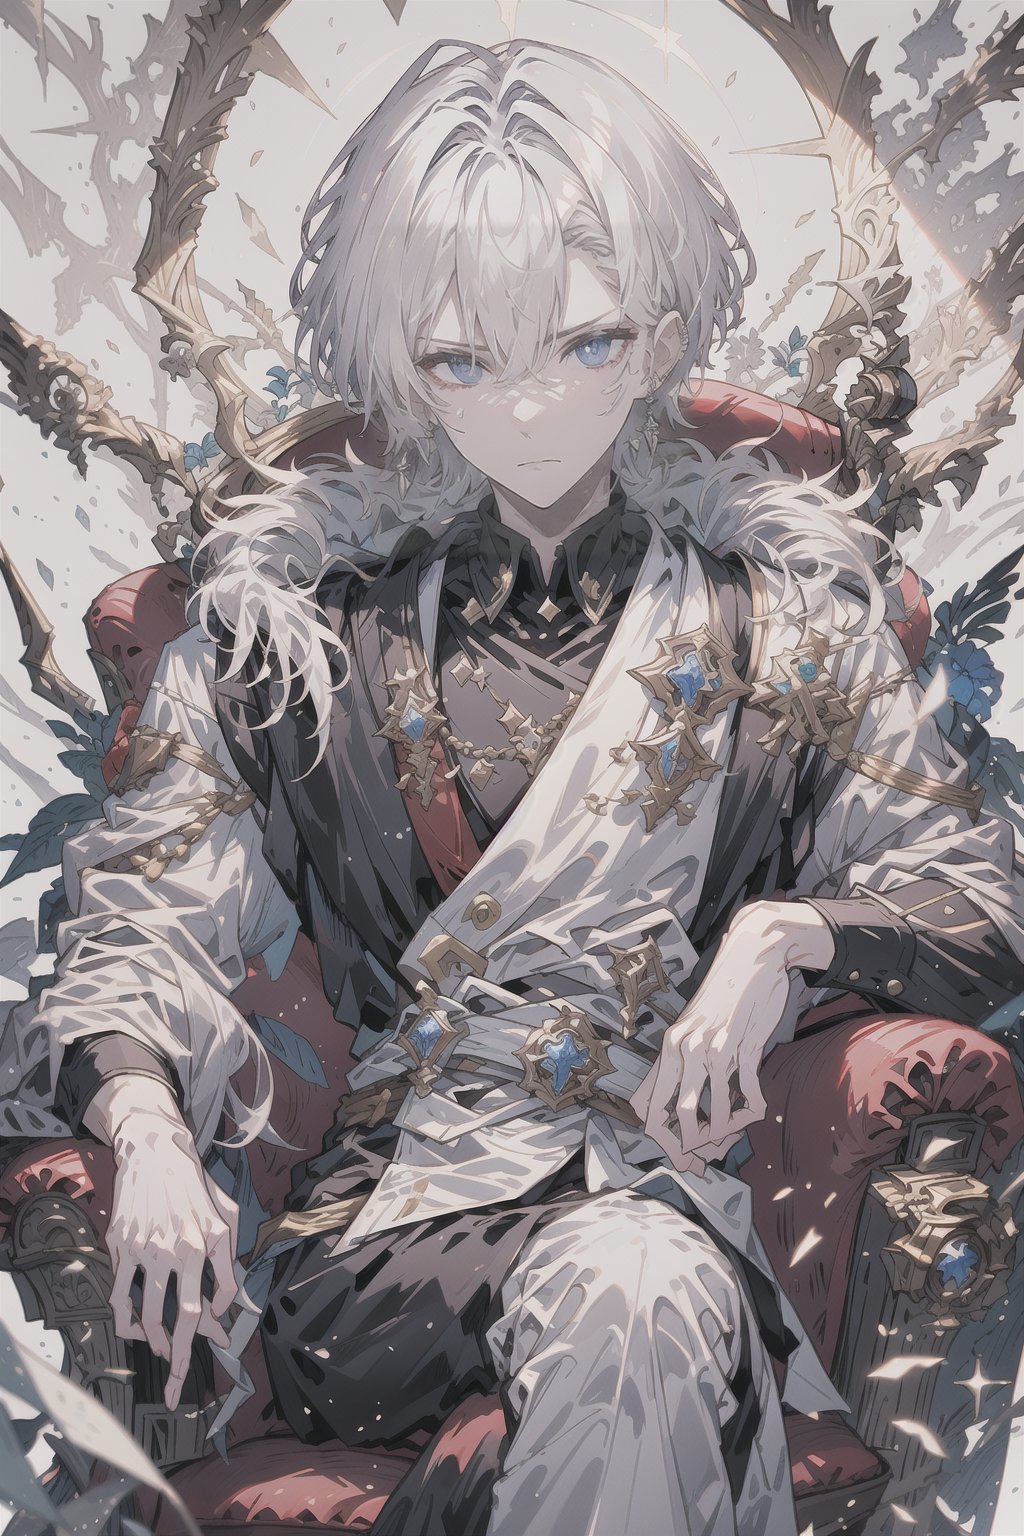 1boy, short hair, white hair, bright lighting, light shining on hair, white background, sitting, prince, blue eyes, pale skin, looking_at_viewer, cold expression, frown, close up, portrait, white royal attire, silver long earpiercing, masterpiece, best quality, amazing quality, white aesthetic, very aesthetic,1guy, masculine, 20 year old